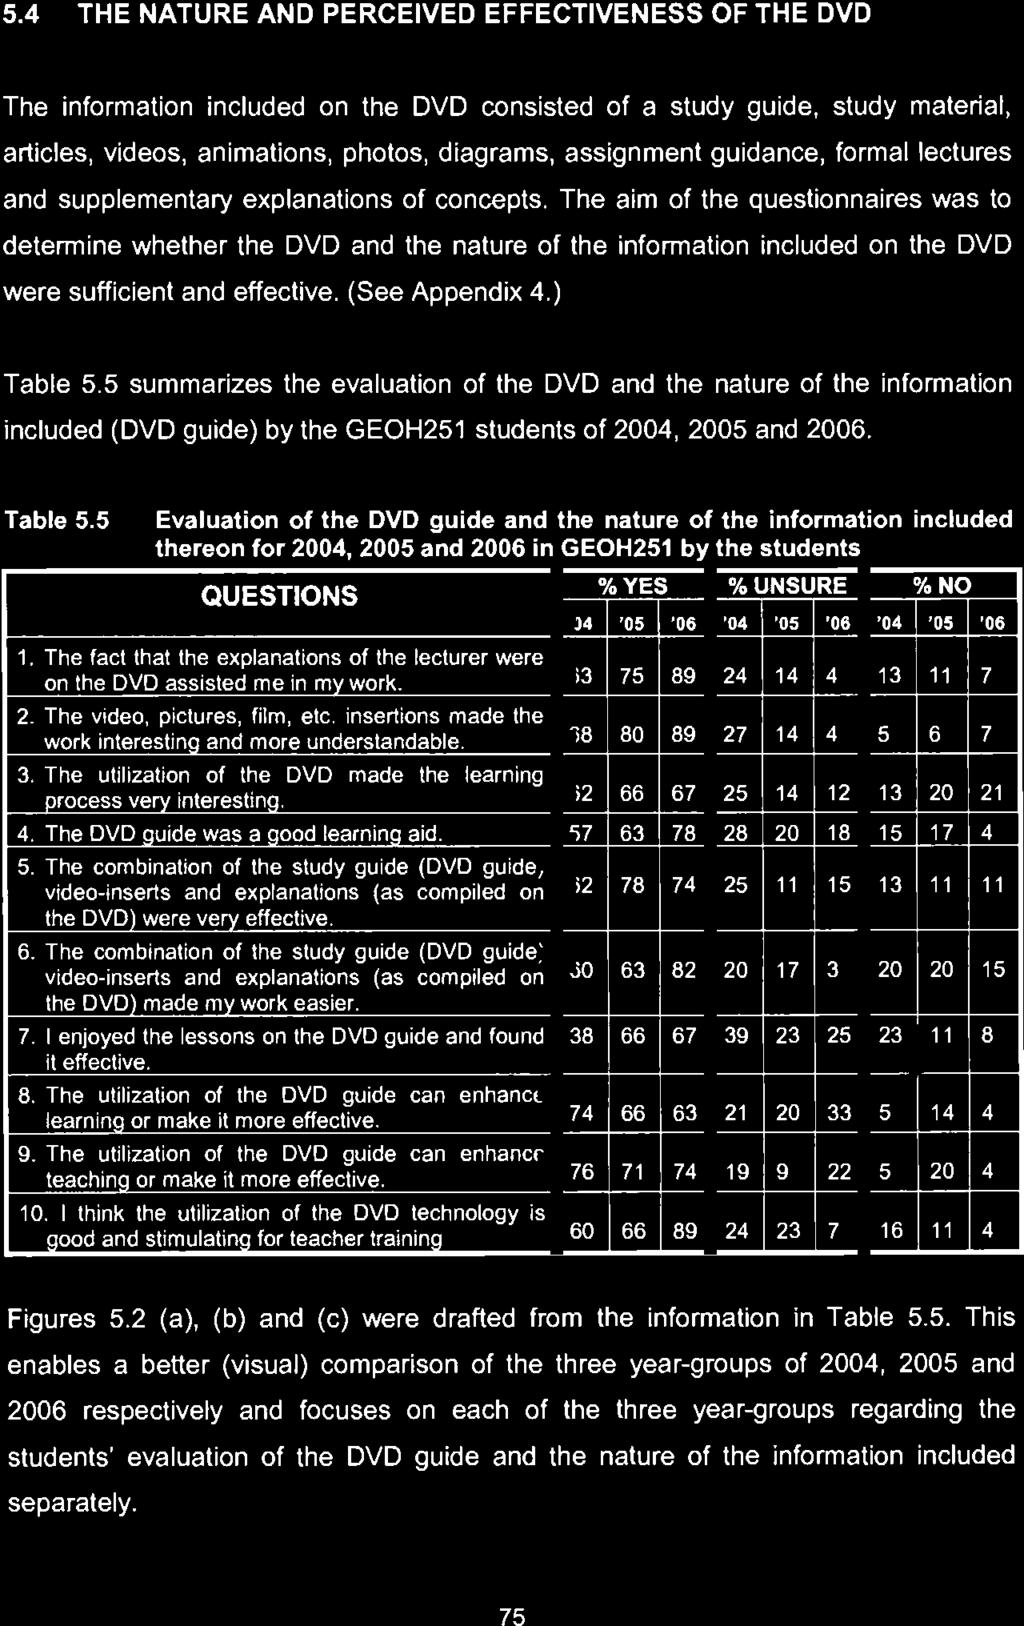 5 Evaluation of the DVD guide and the nature of the information included thereon for 2004,2005 and 2006 in GEOH251 by the students I % YES "UNSURE 1 % NO QUESTIONS 1-v! '04 '06!